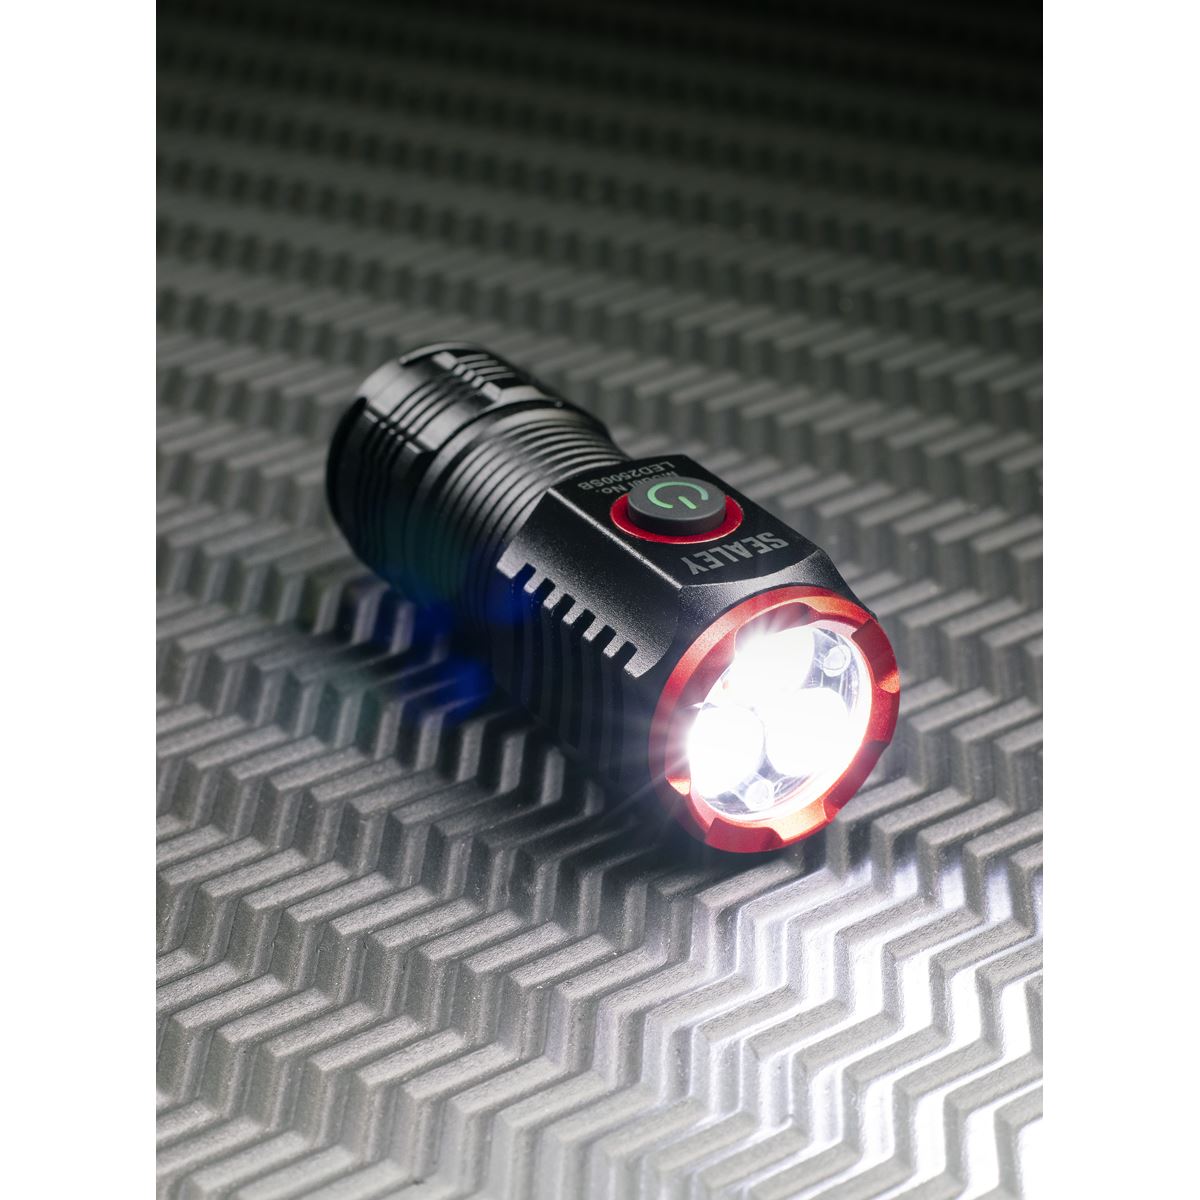 Sealey Super Beam 2500lm Rechargeable SMD LED 24W Pocket Light